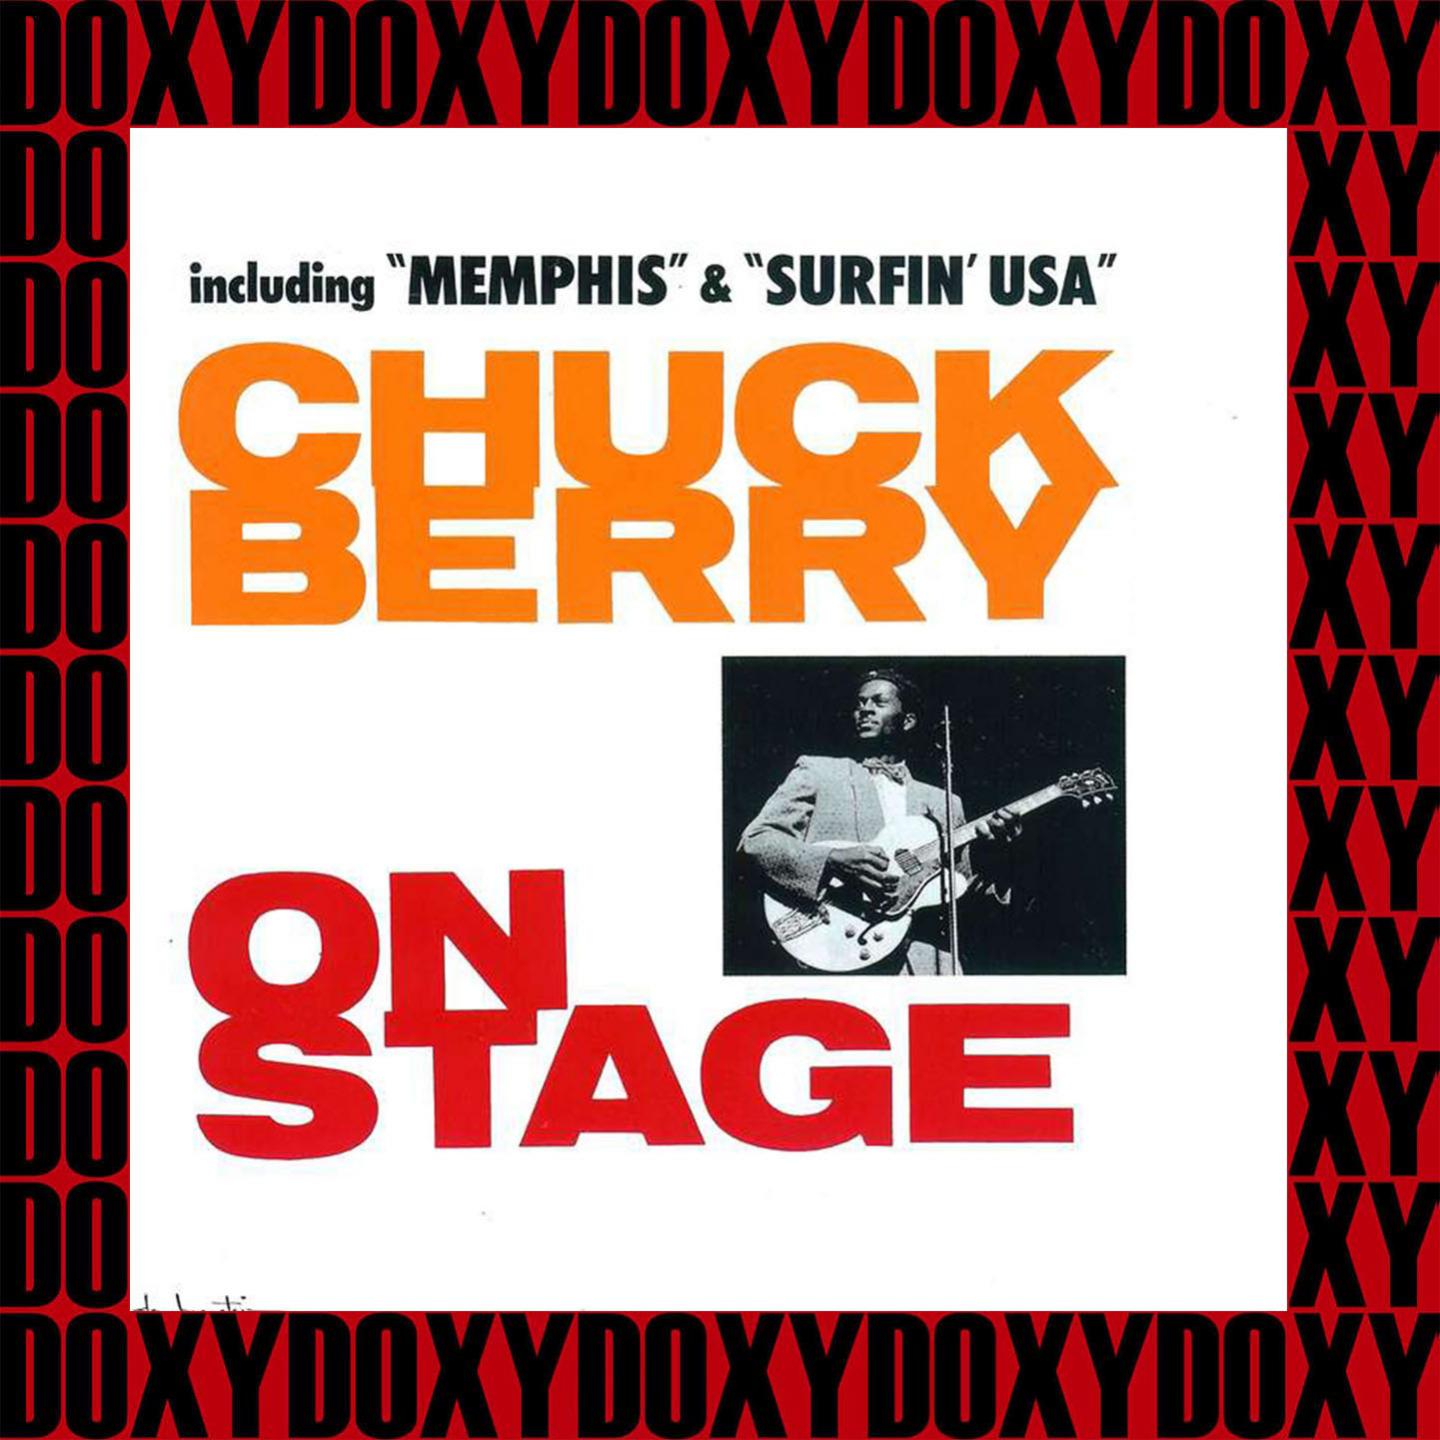 Chuck Berry on Stage (Special Content, Japanese, Remastered Version) (Doxy Collection)